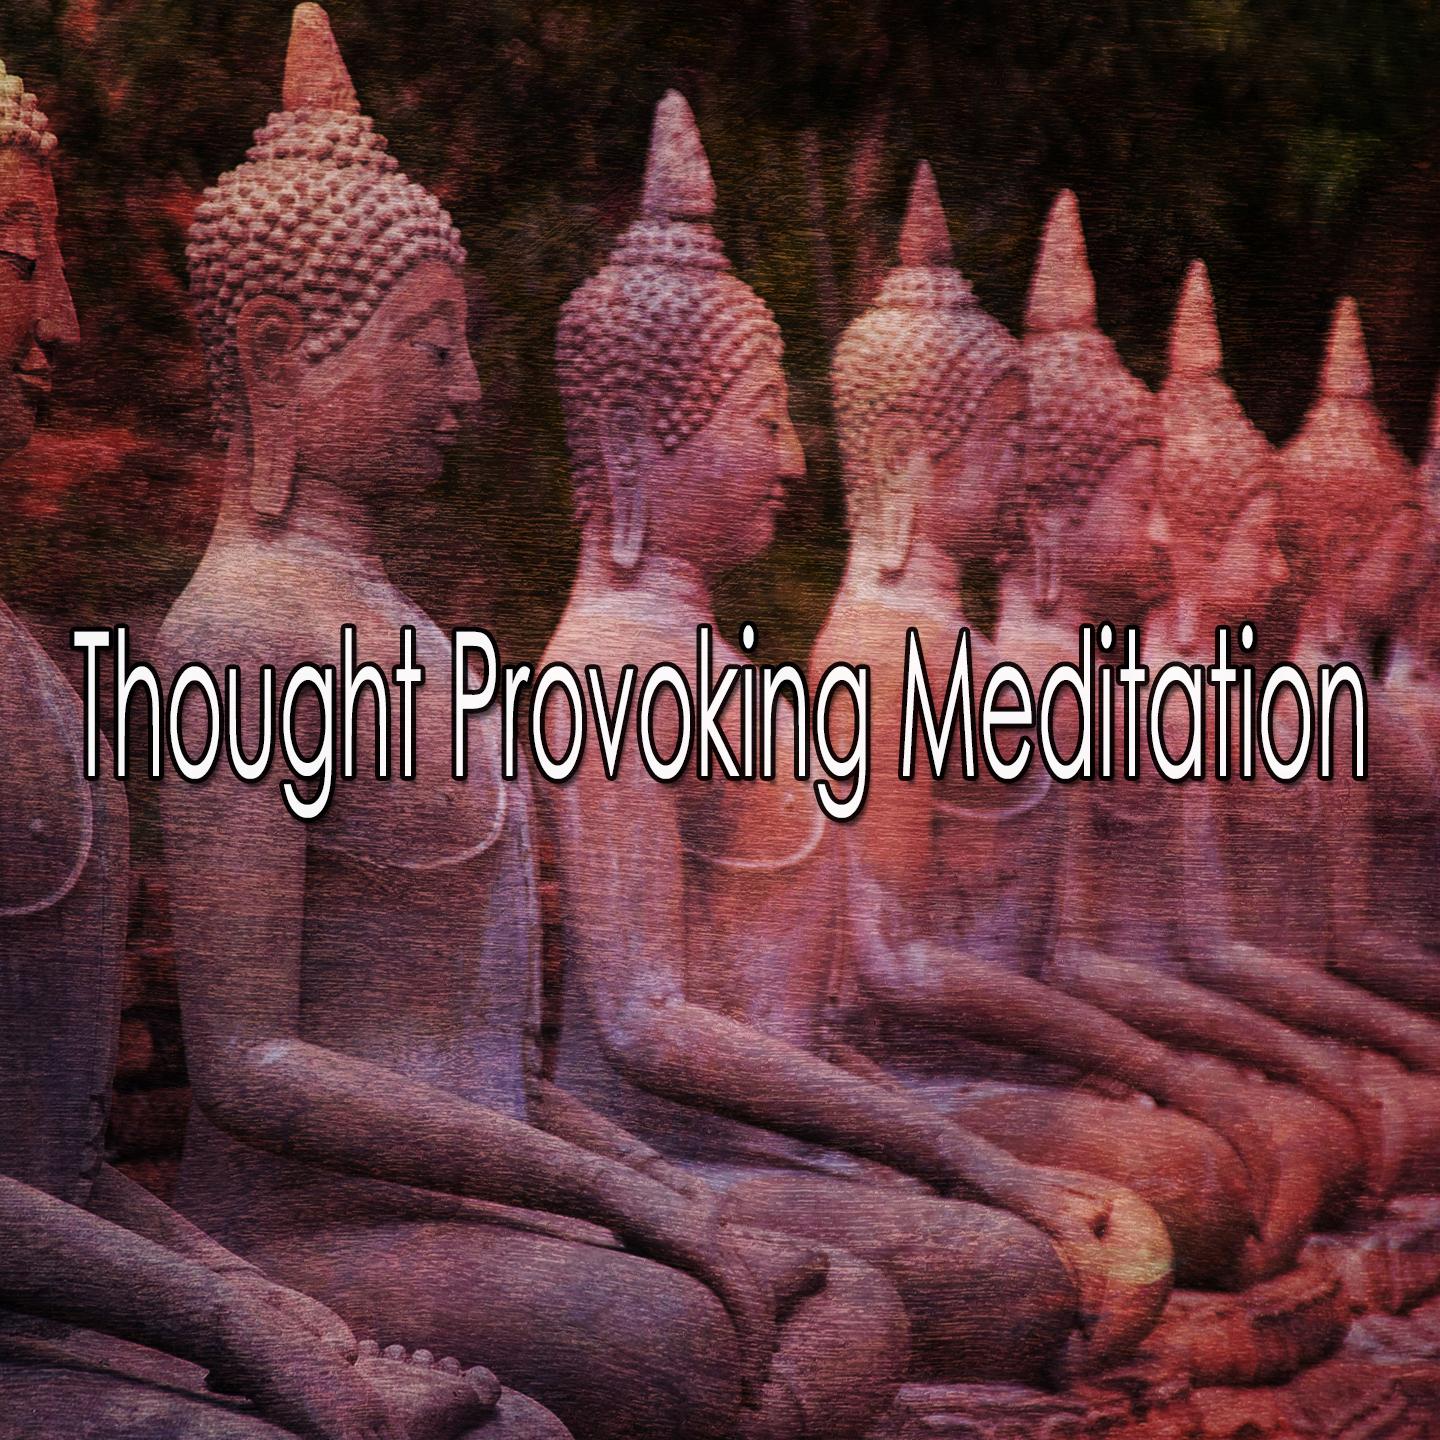 Thought Provoking Meditation